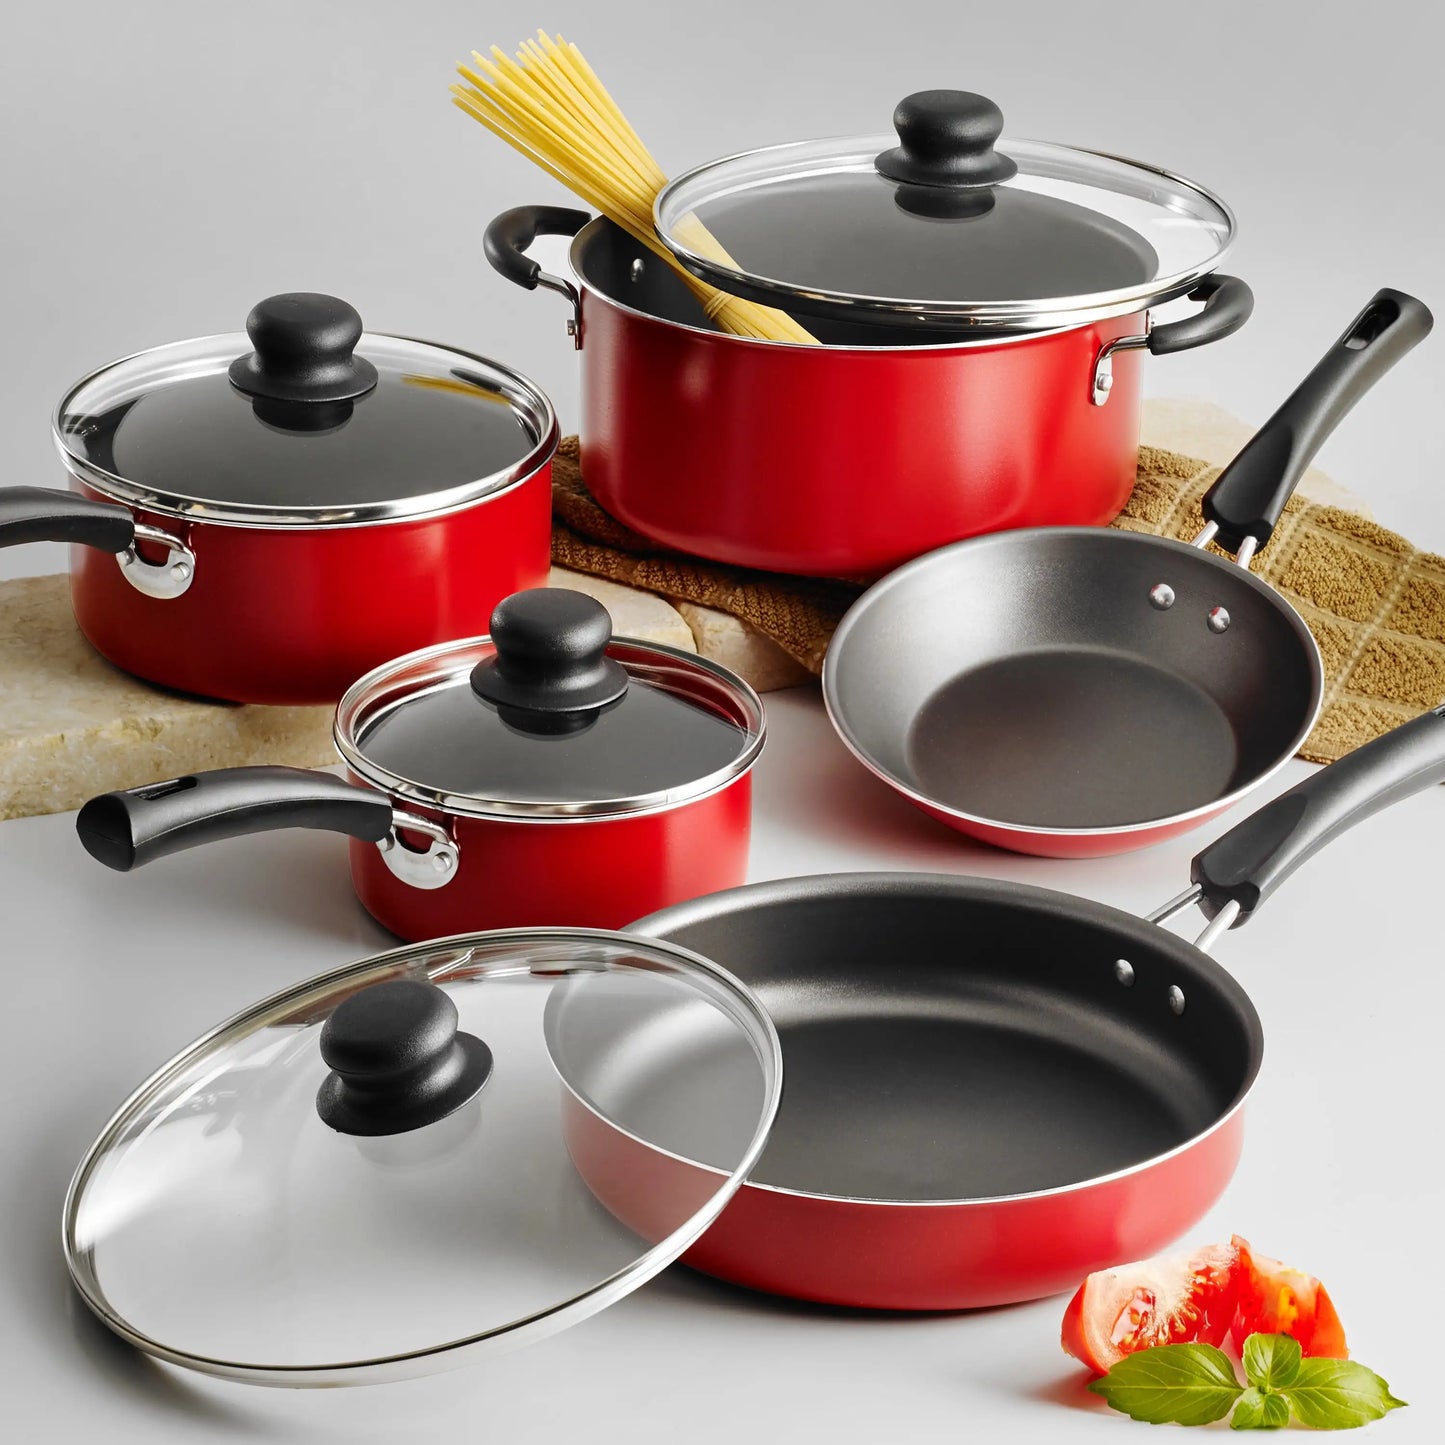 Non-stick Cookware Set Pots and Pans for Home Kitchen, Stackable Induction Cookware, Pot and Pan set, Pans for Cooking